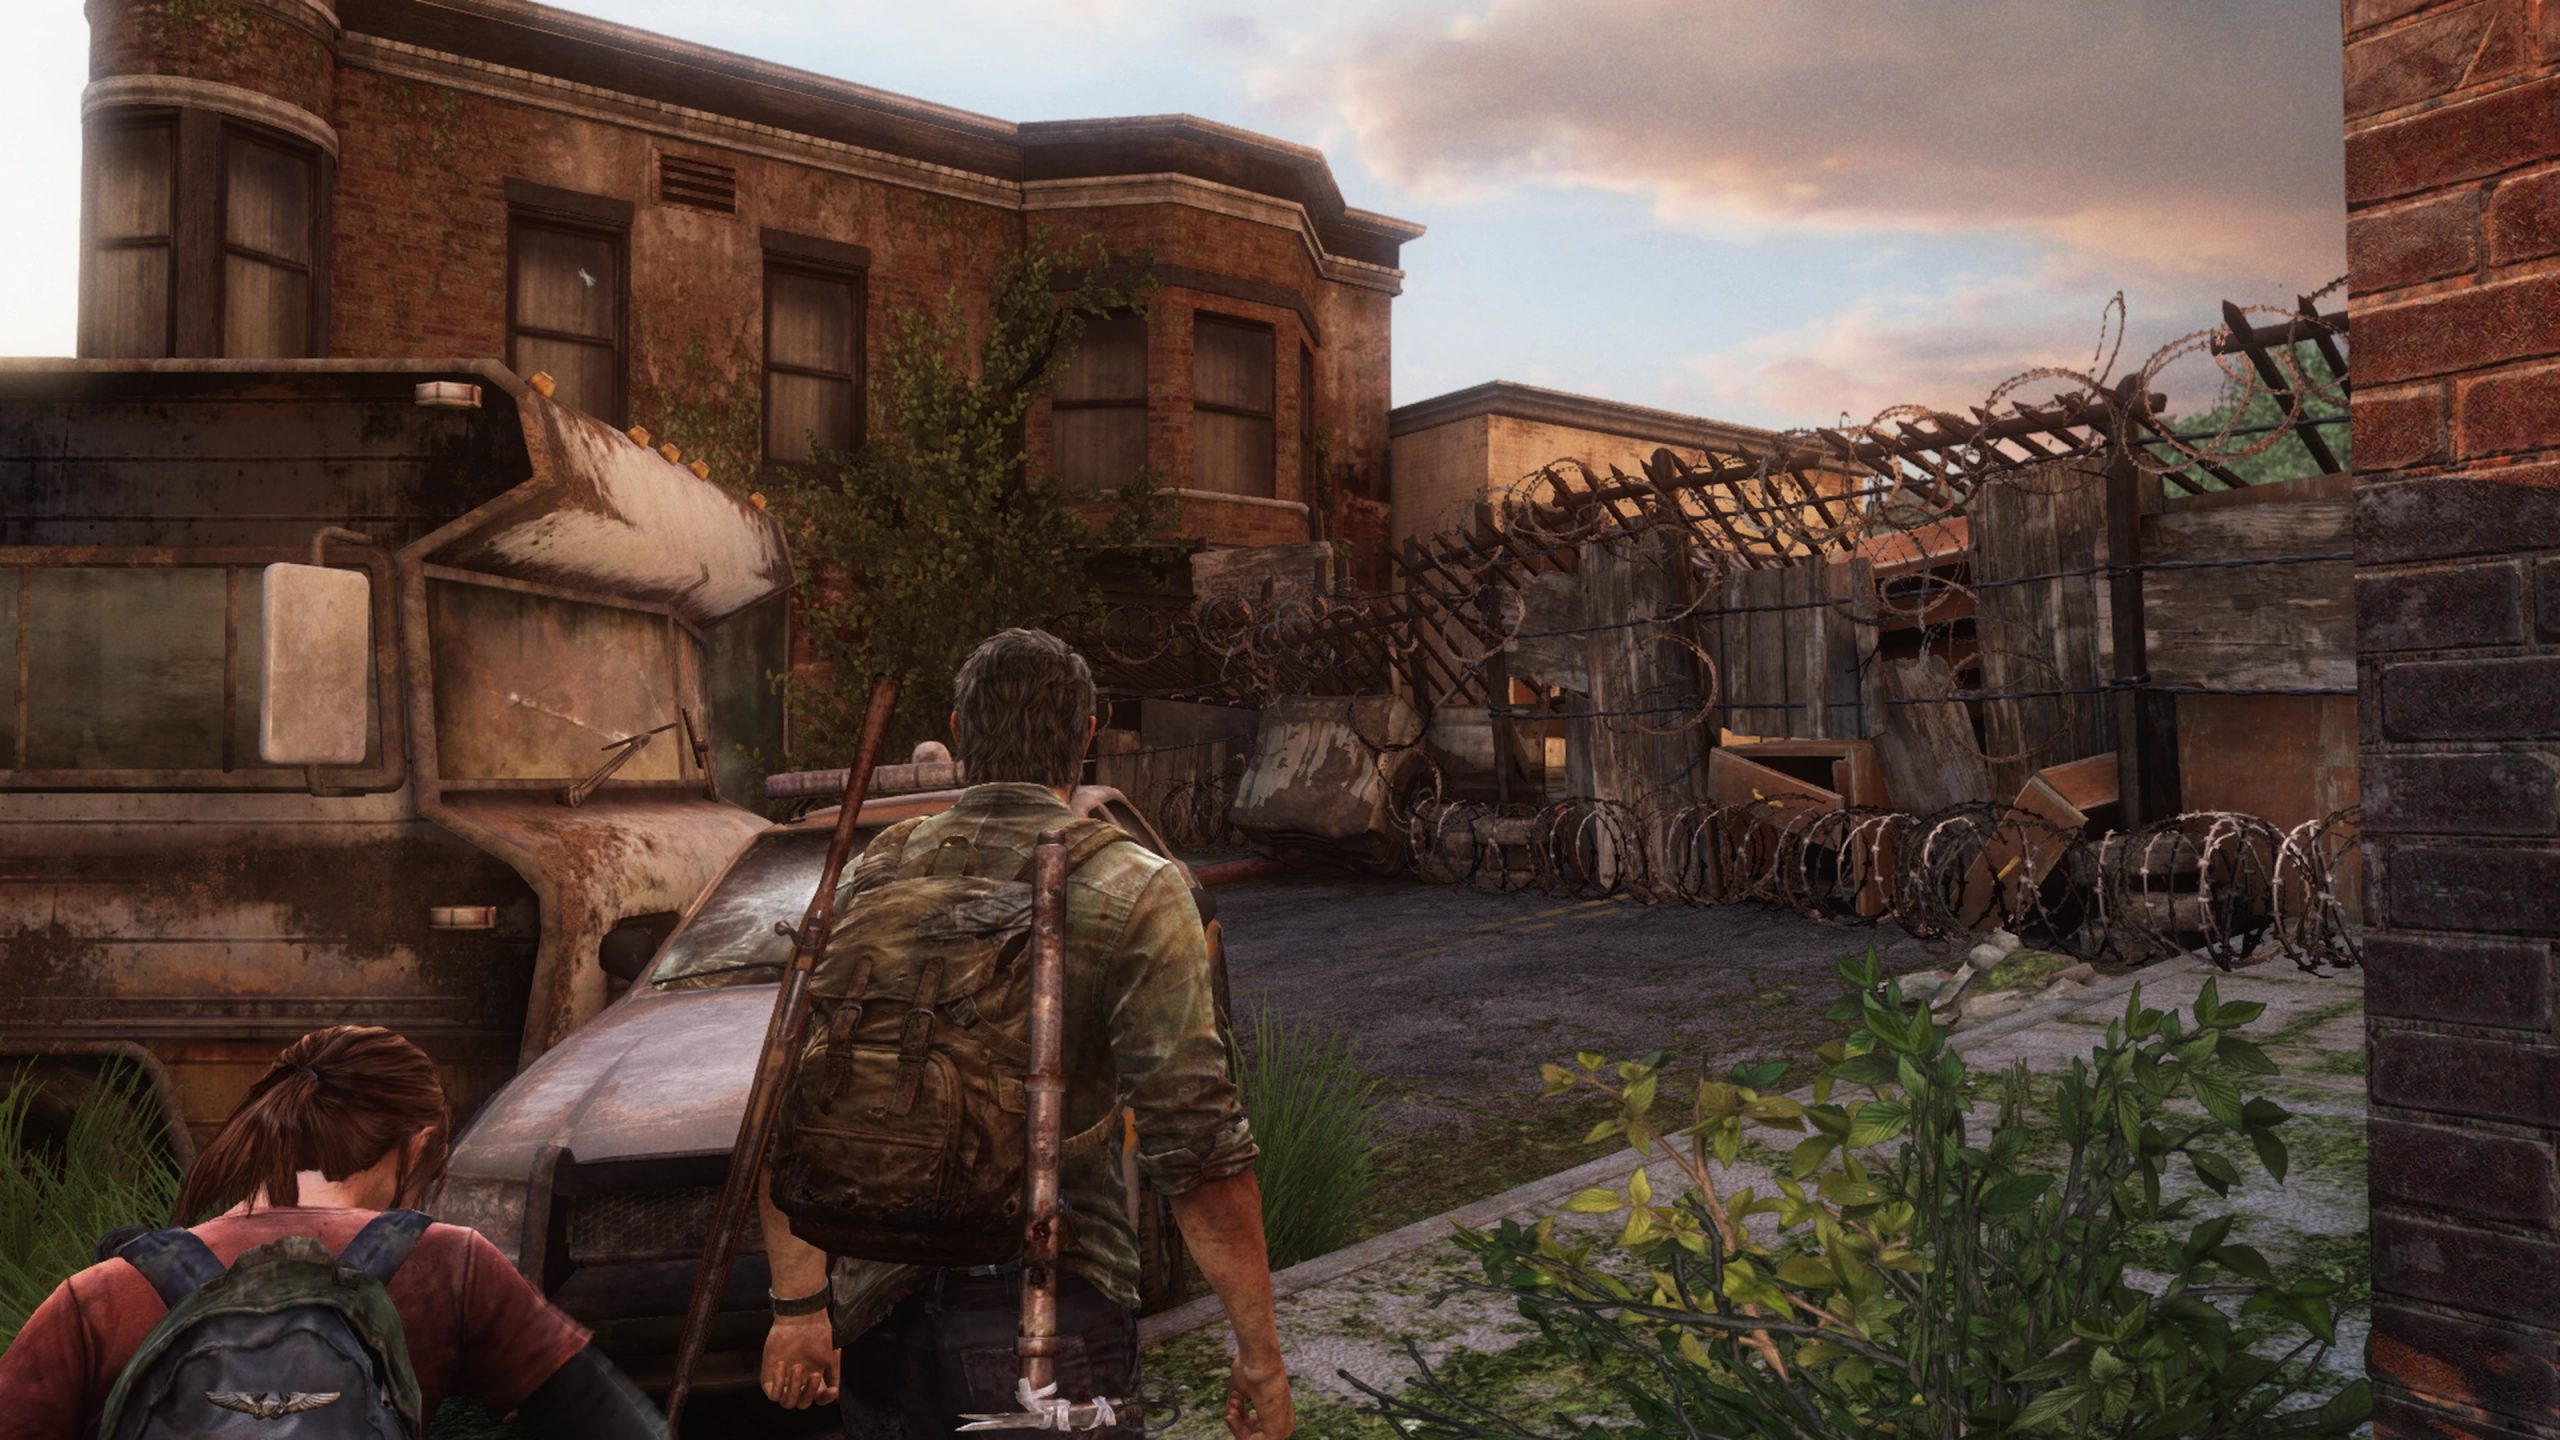 The Last of Us episode 3 release time: When does Long Long Time